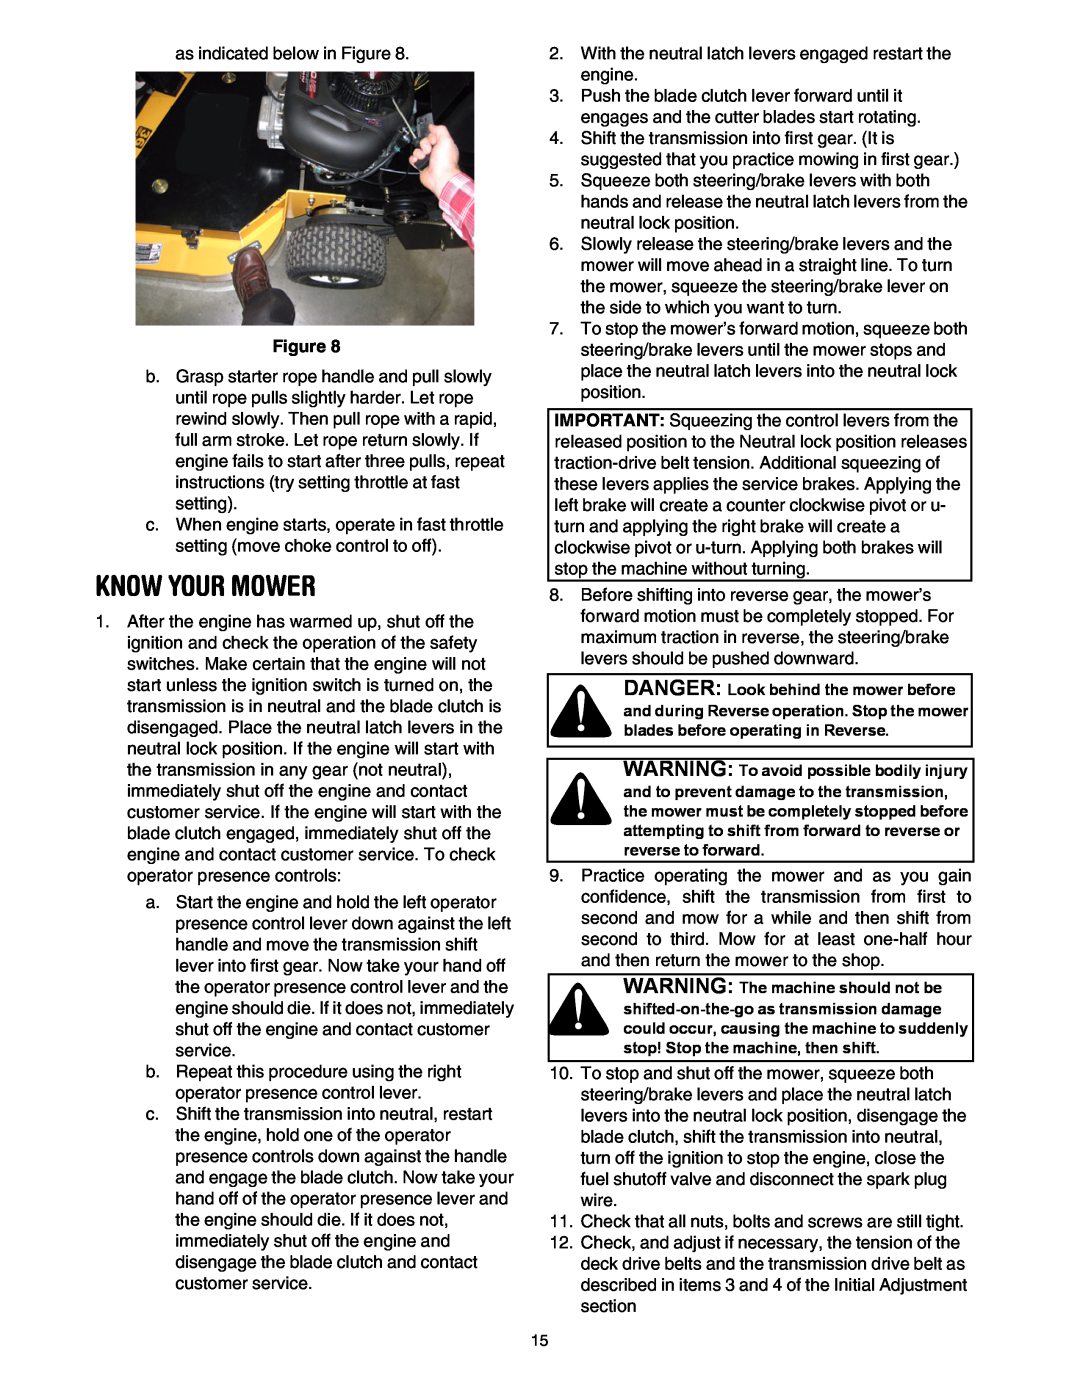 Cub Cadet G 1236 service manual Know Your Mower 